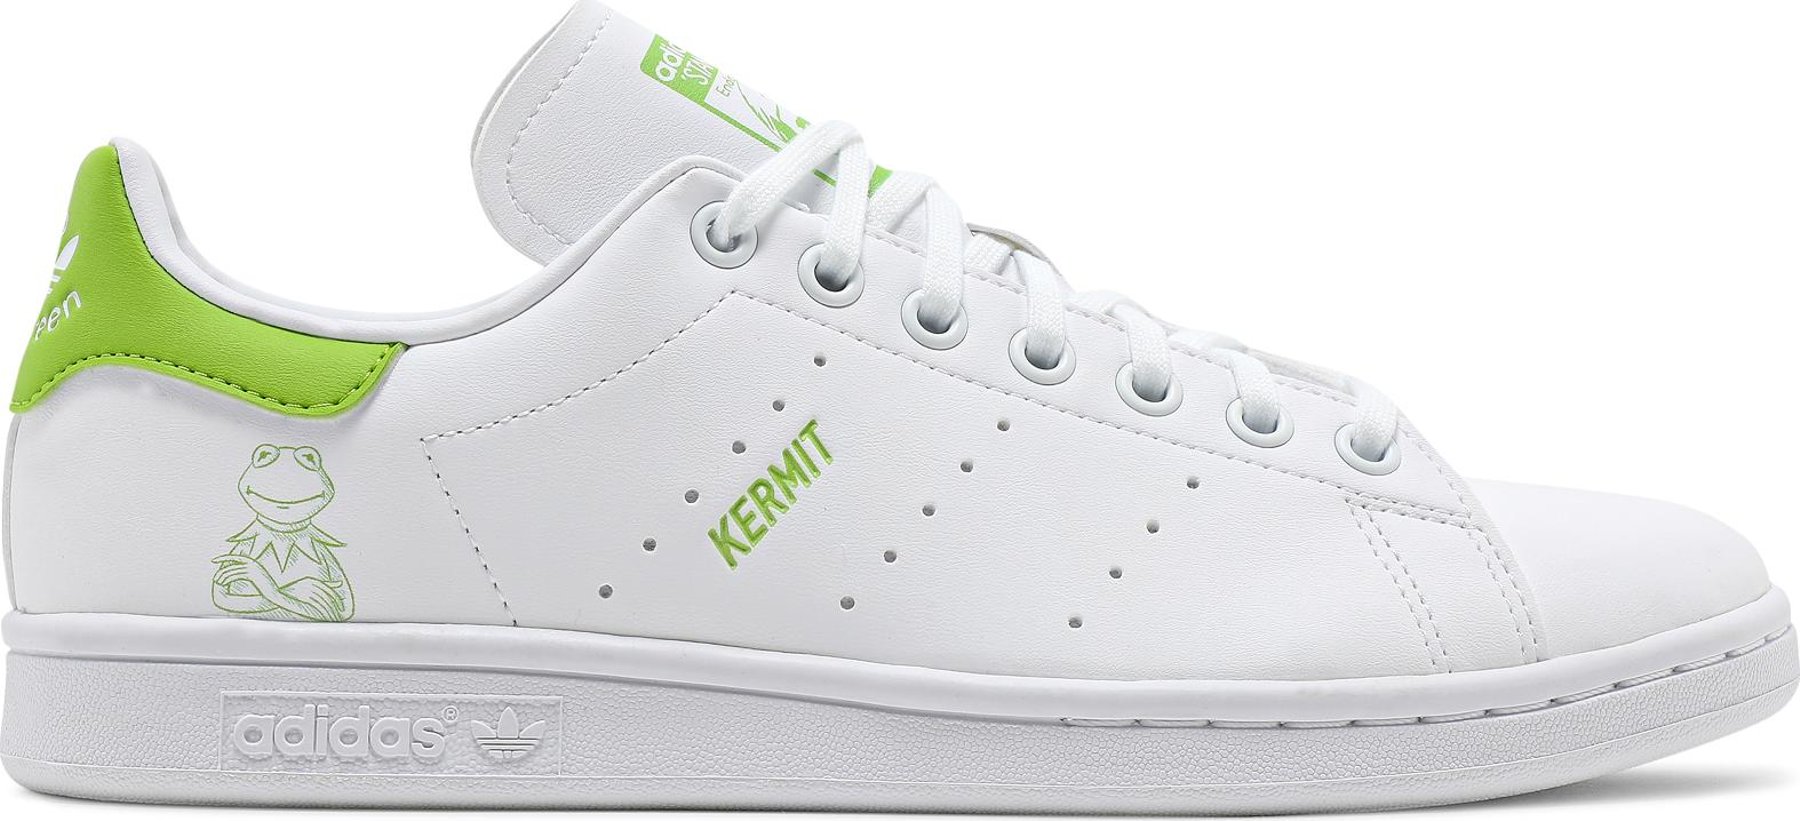 Buy The Muppets x Stan Smith J 'Kermit The Frog' - FY6535 | GOAT